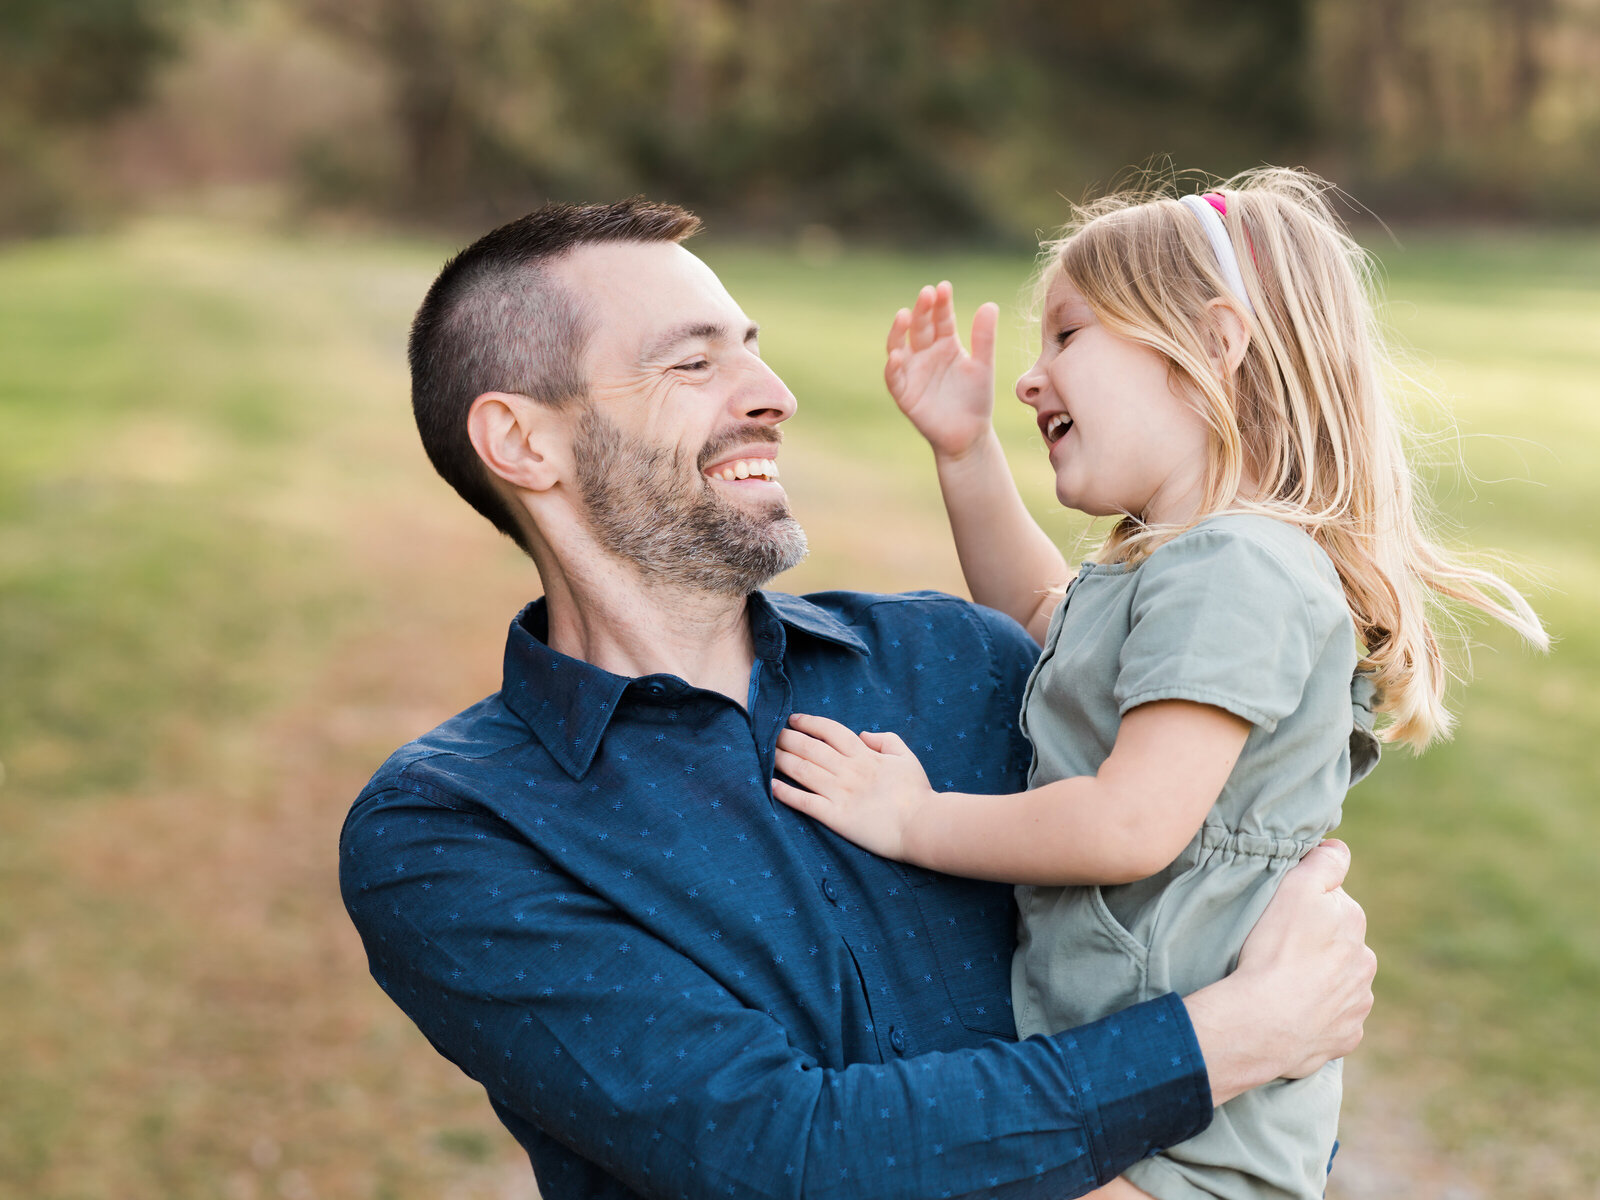 dad and daughter laughing in park for family portraits